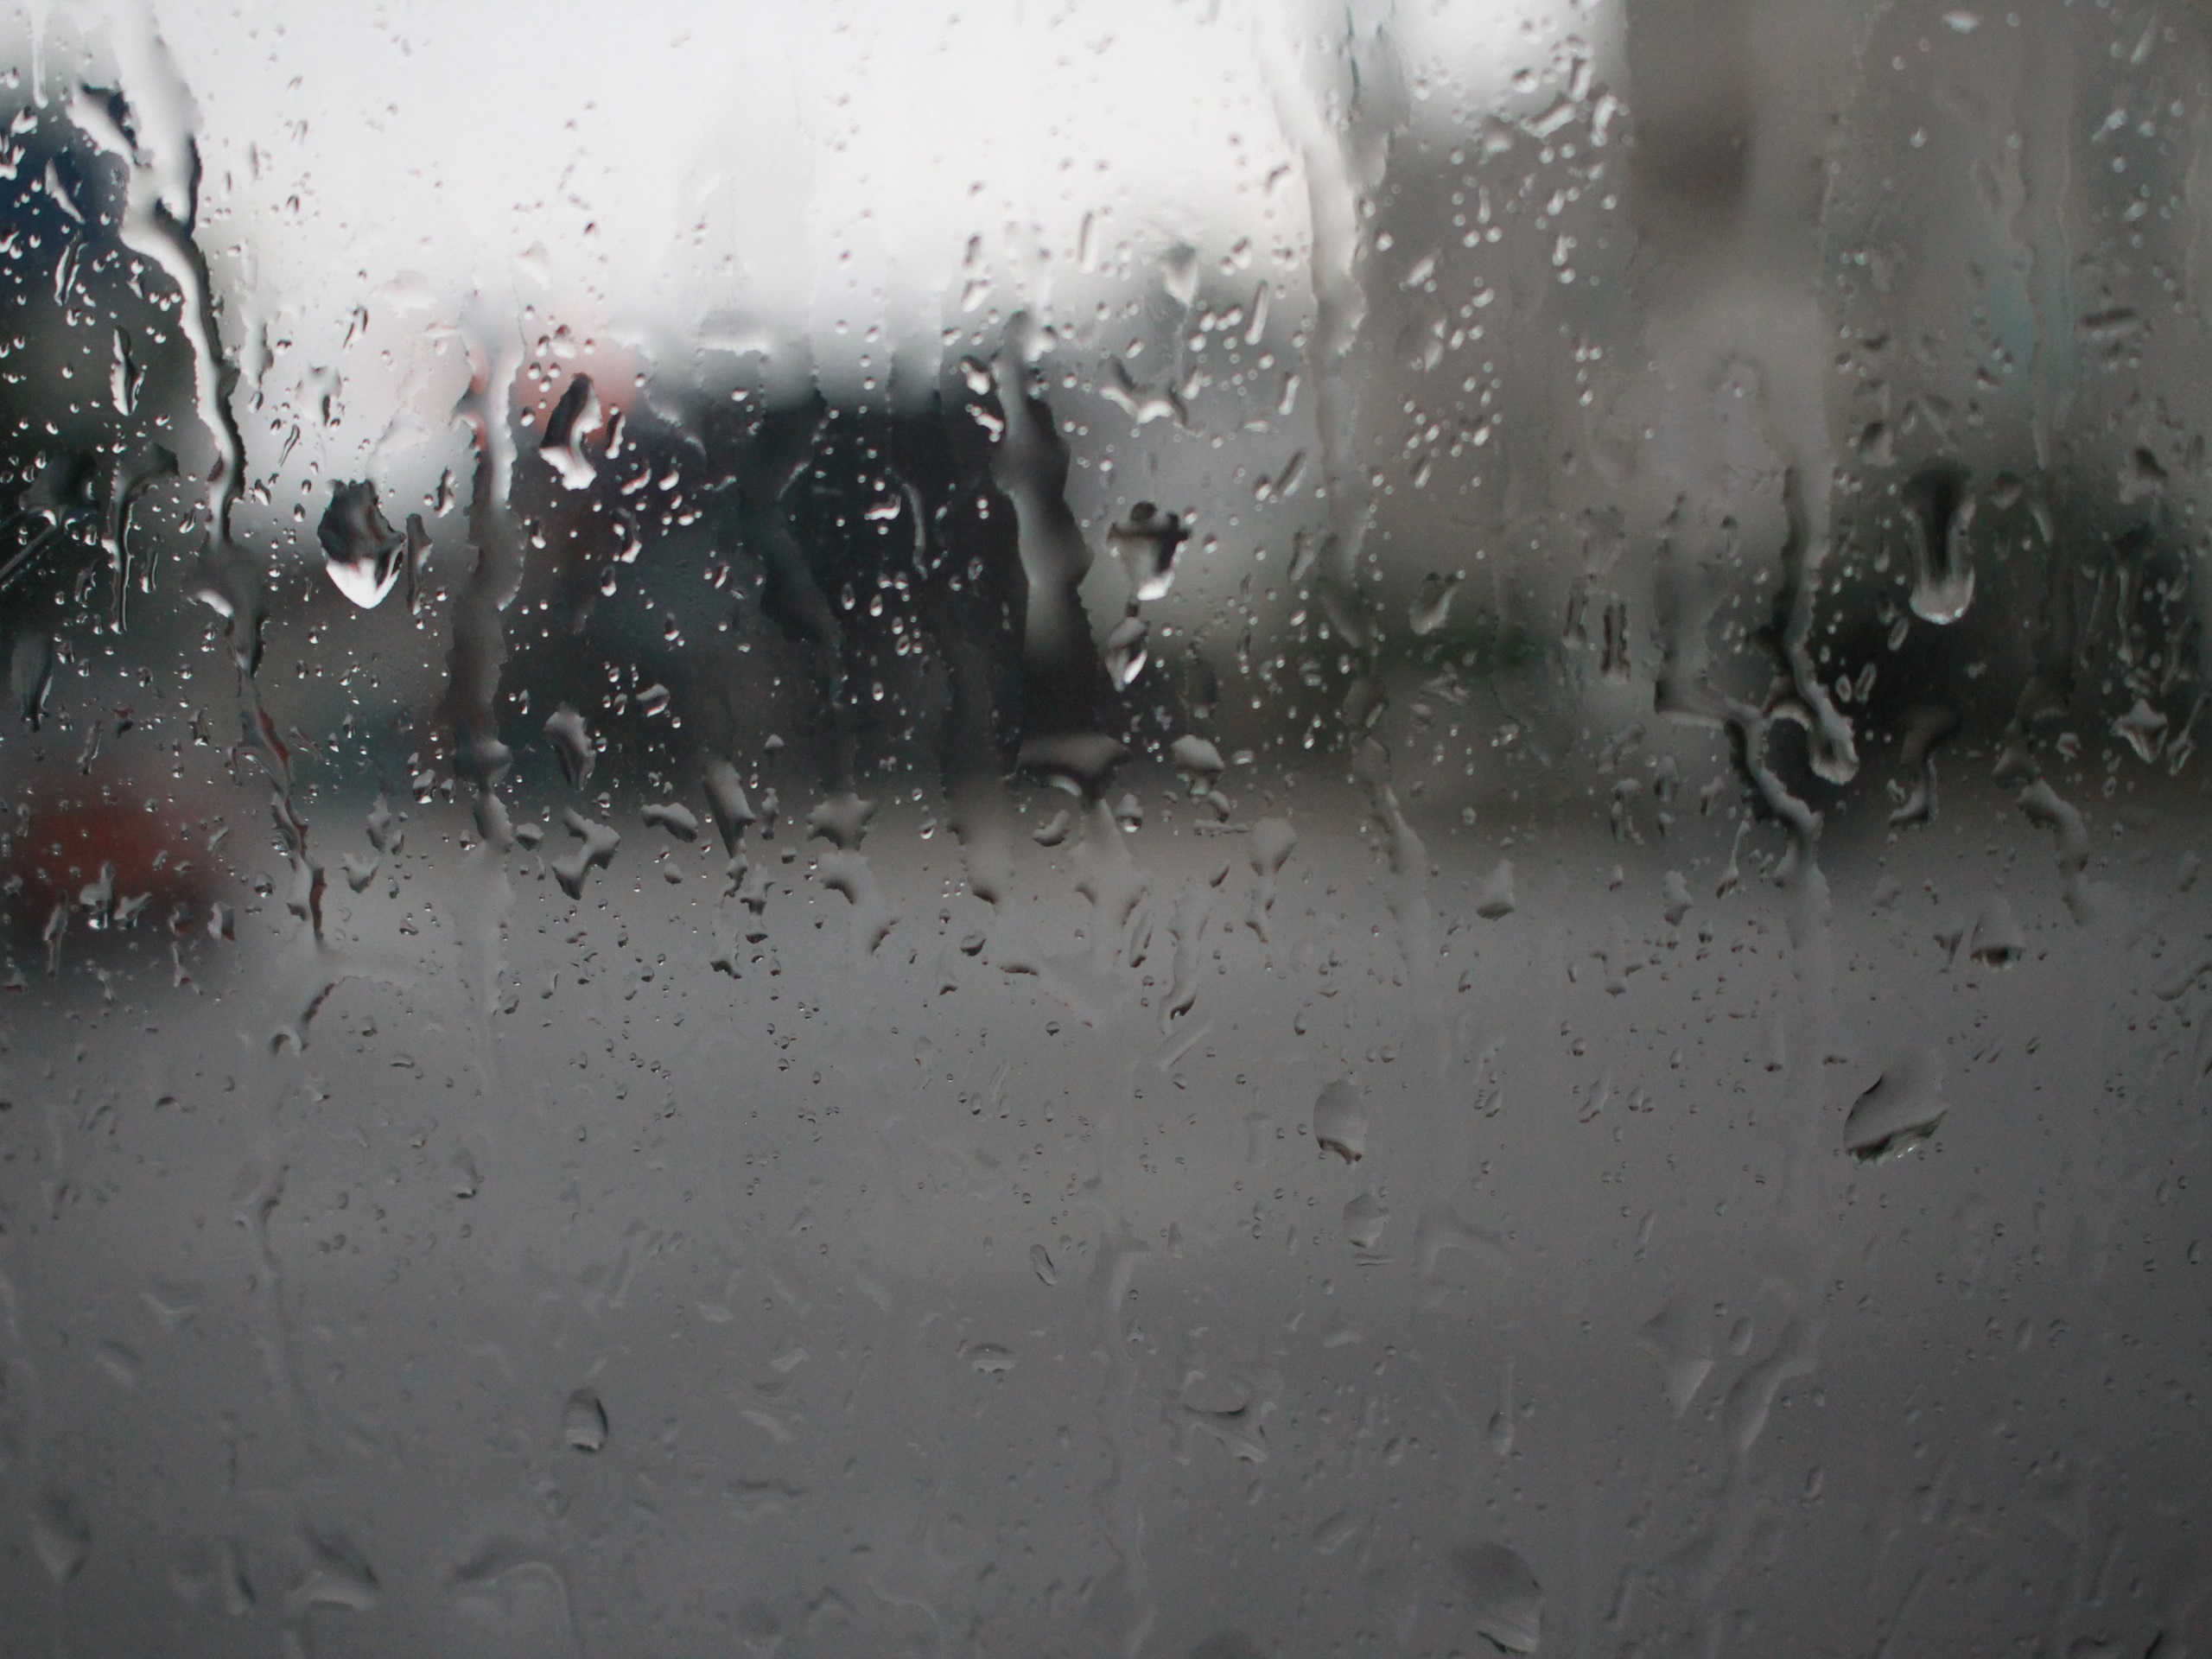 Rainy Day Cover Photo For Facebook - HD Wallpaper 